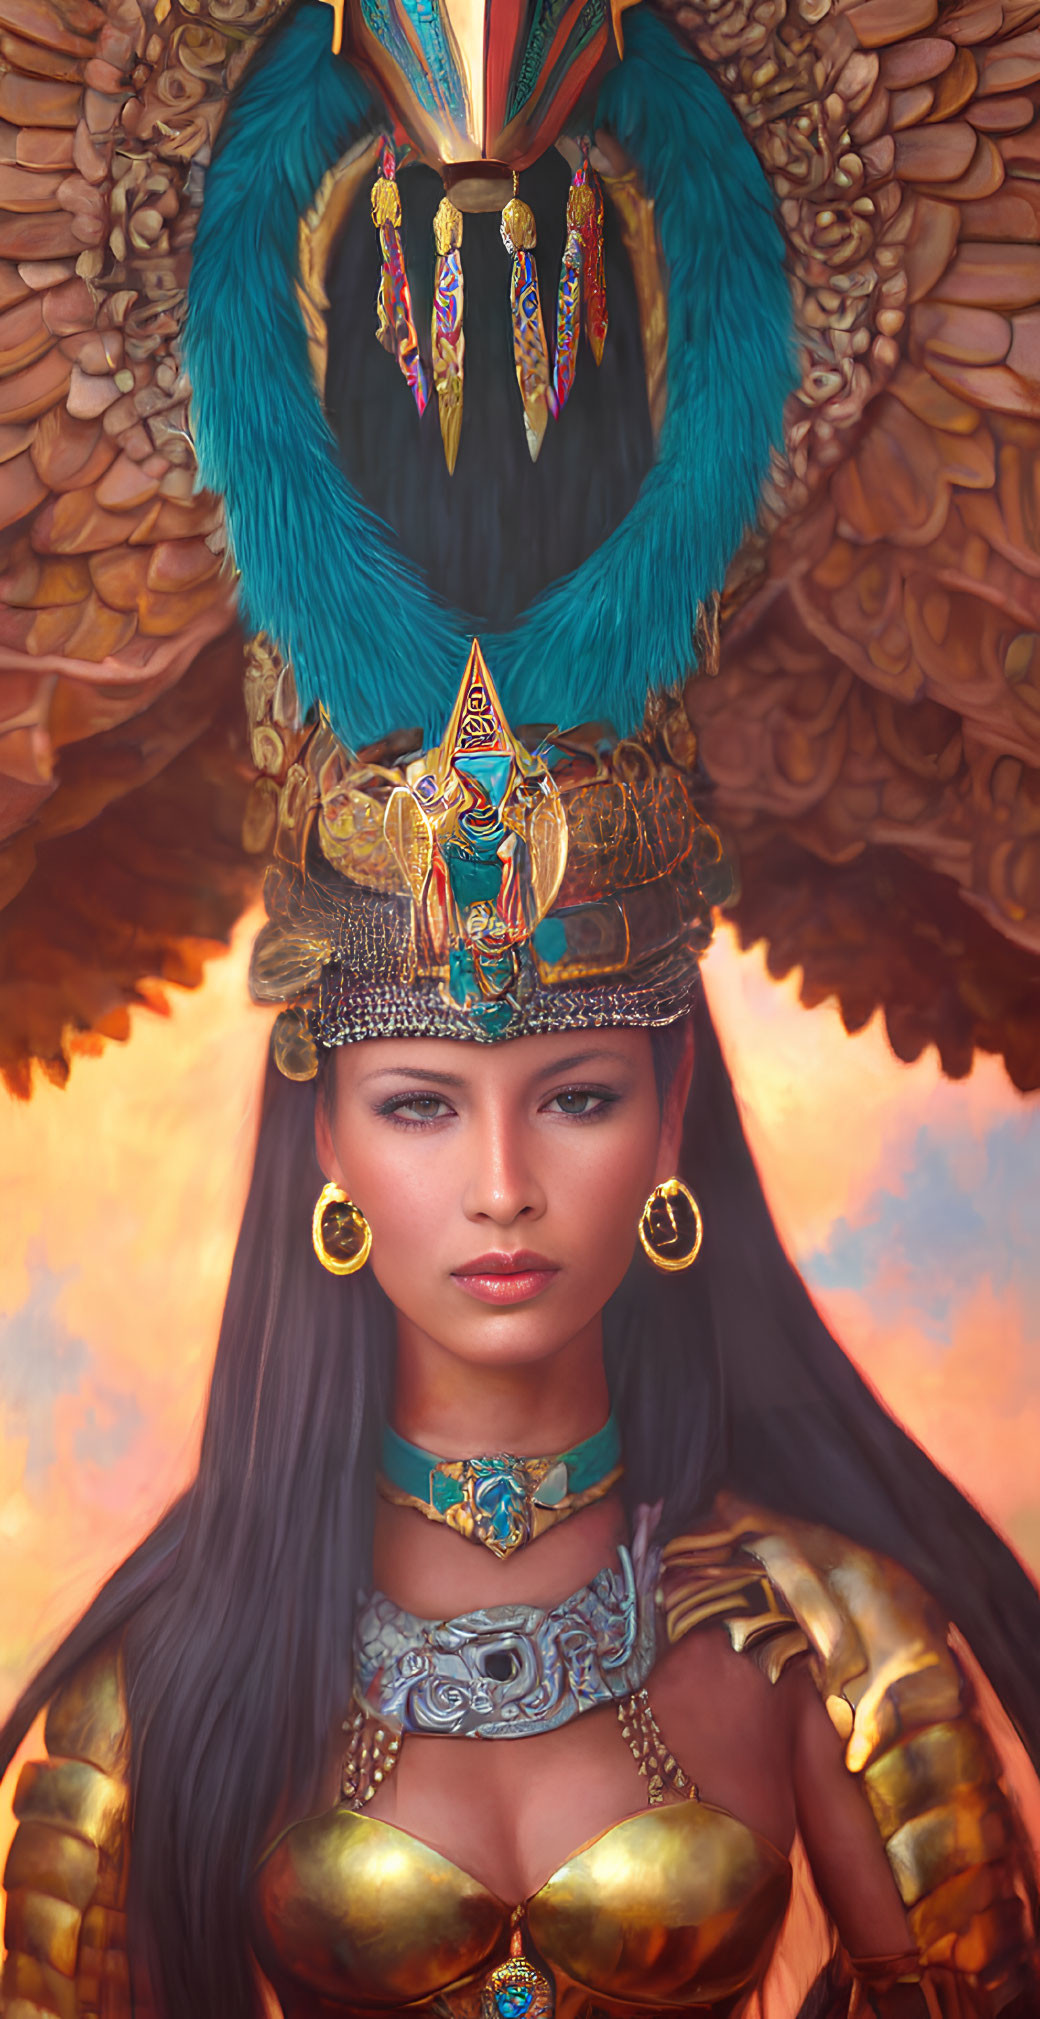 Detailed illustration of woman with feathered headdress and ornate jewelry